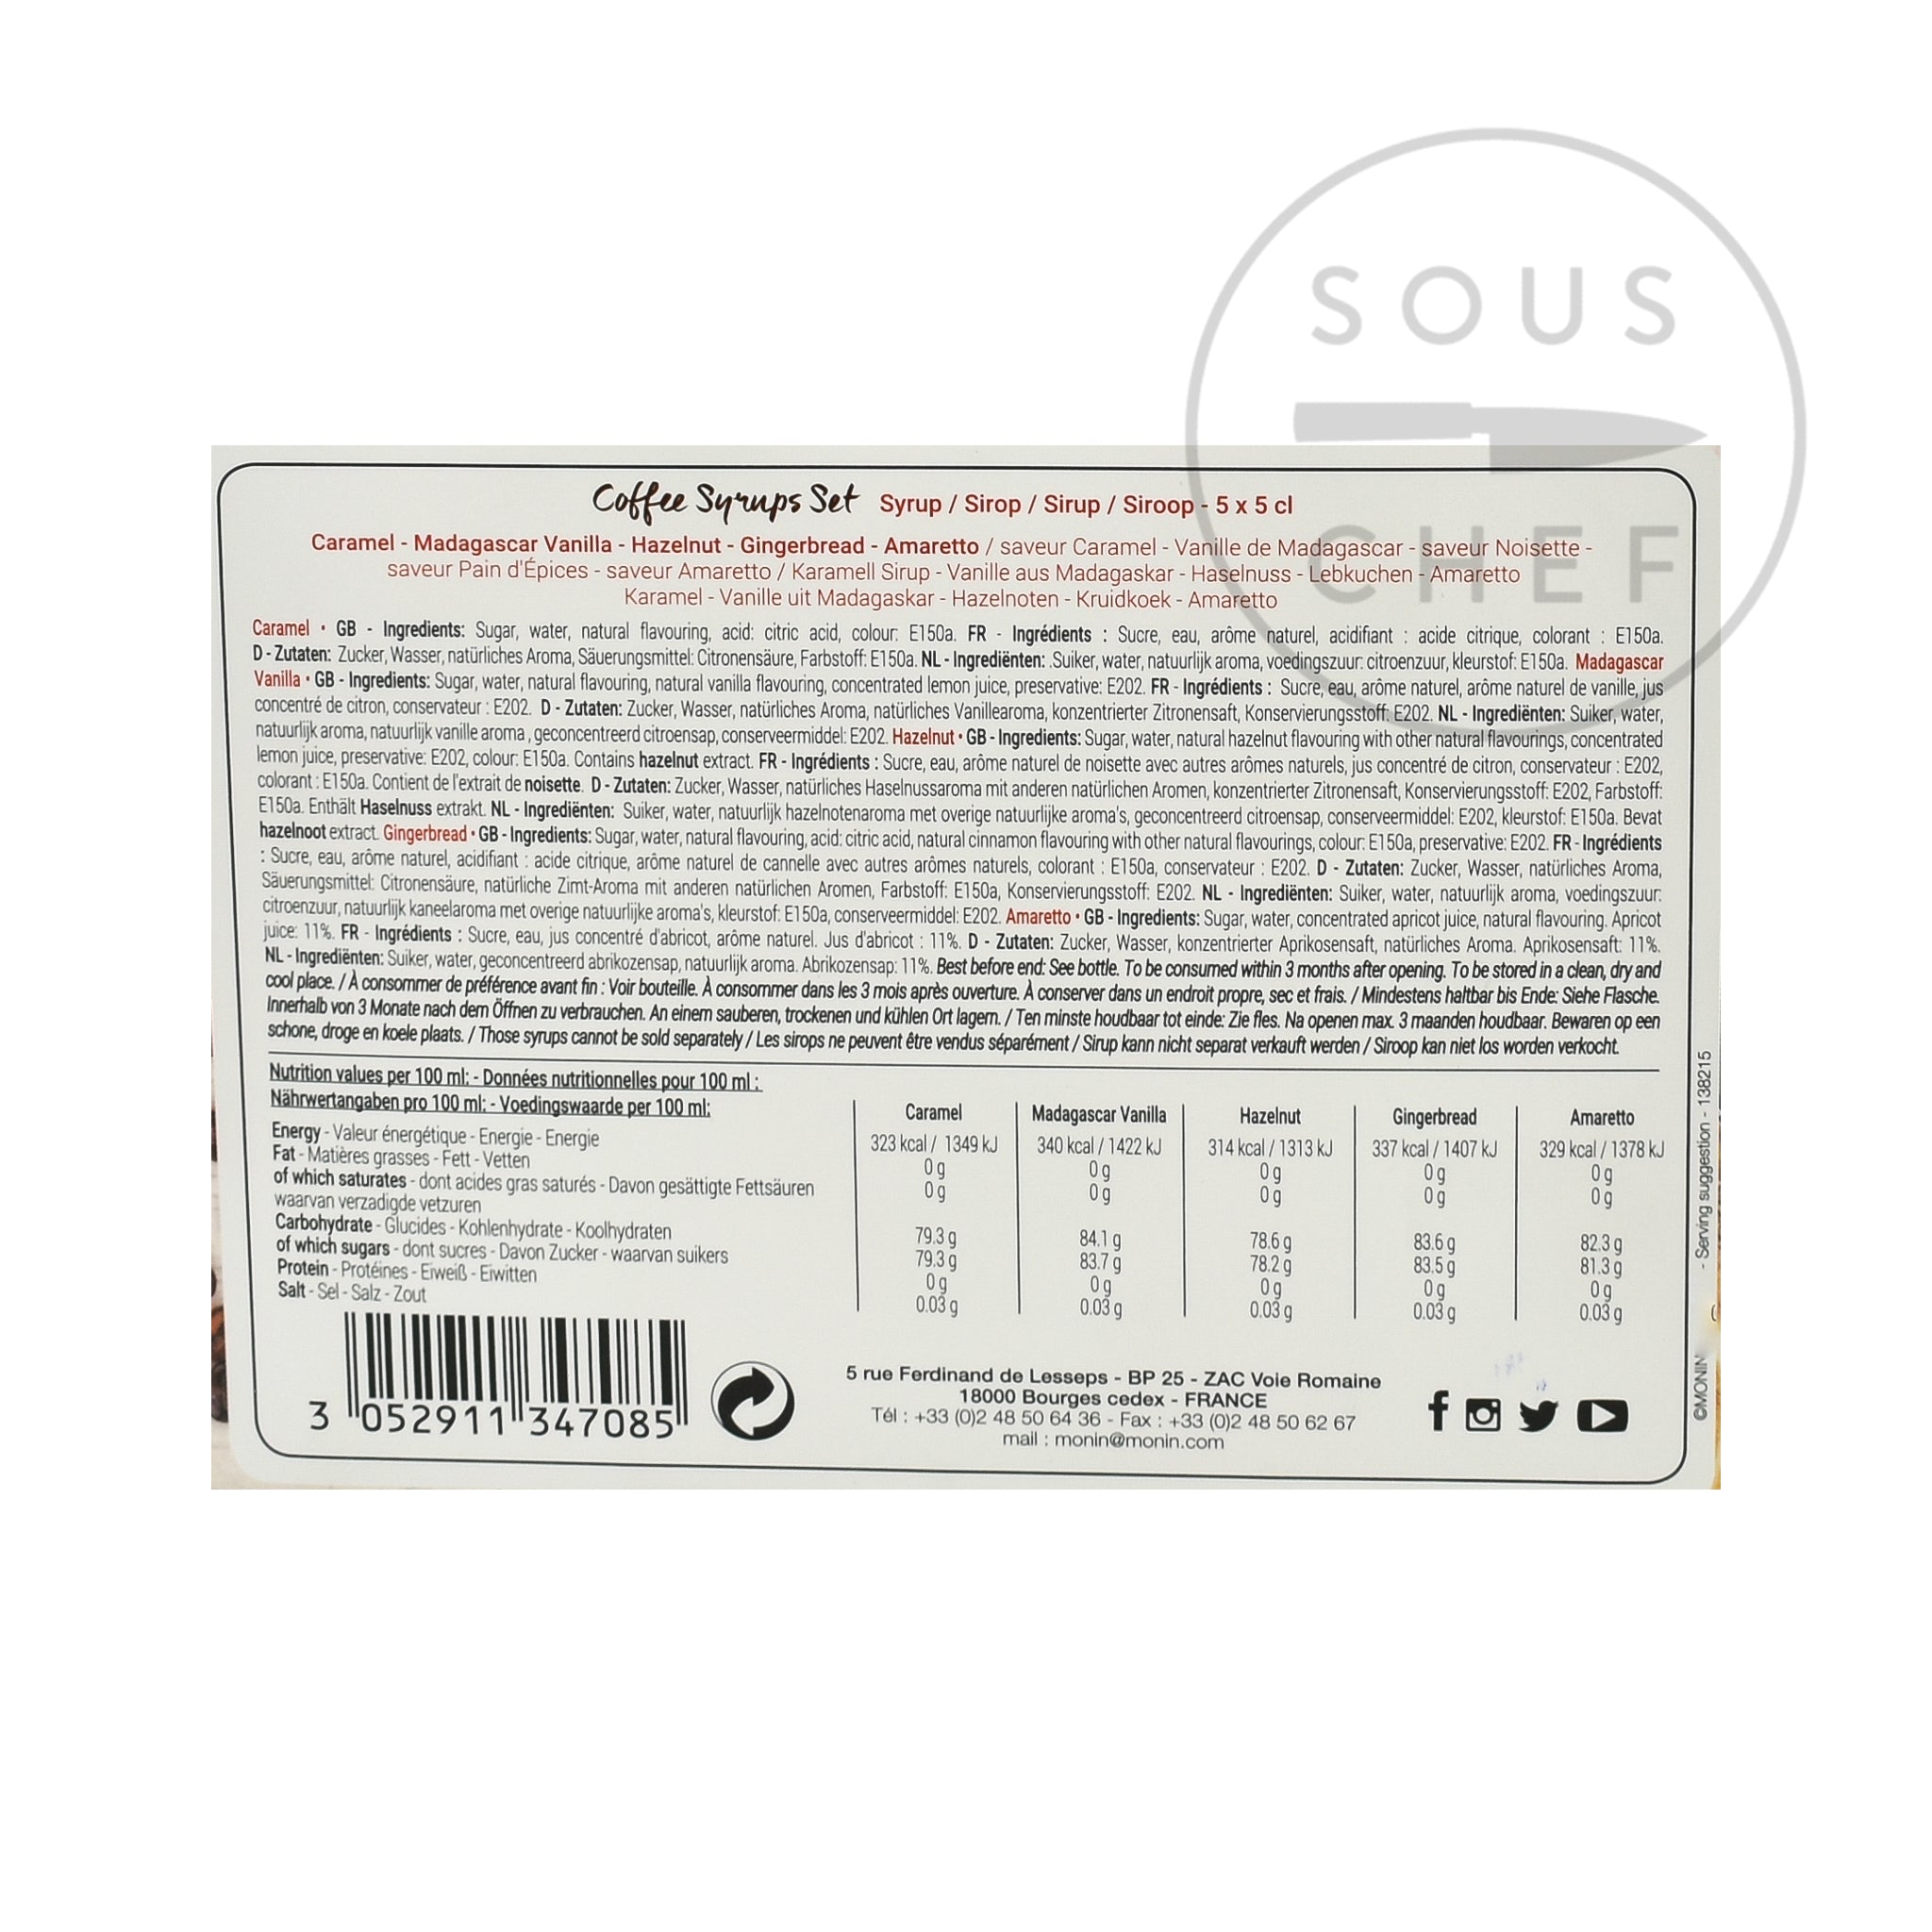 Monin Coffee Syrup Set 5 x 50ml Ingredients Drinks Syrups & Concentrates French Food Ingredients Nutritional Information